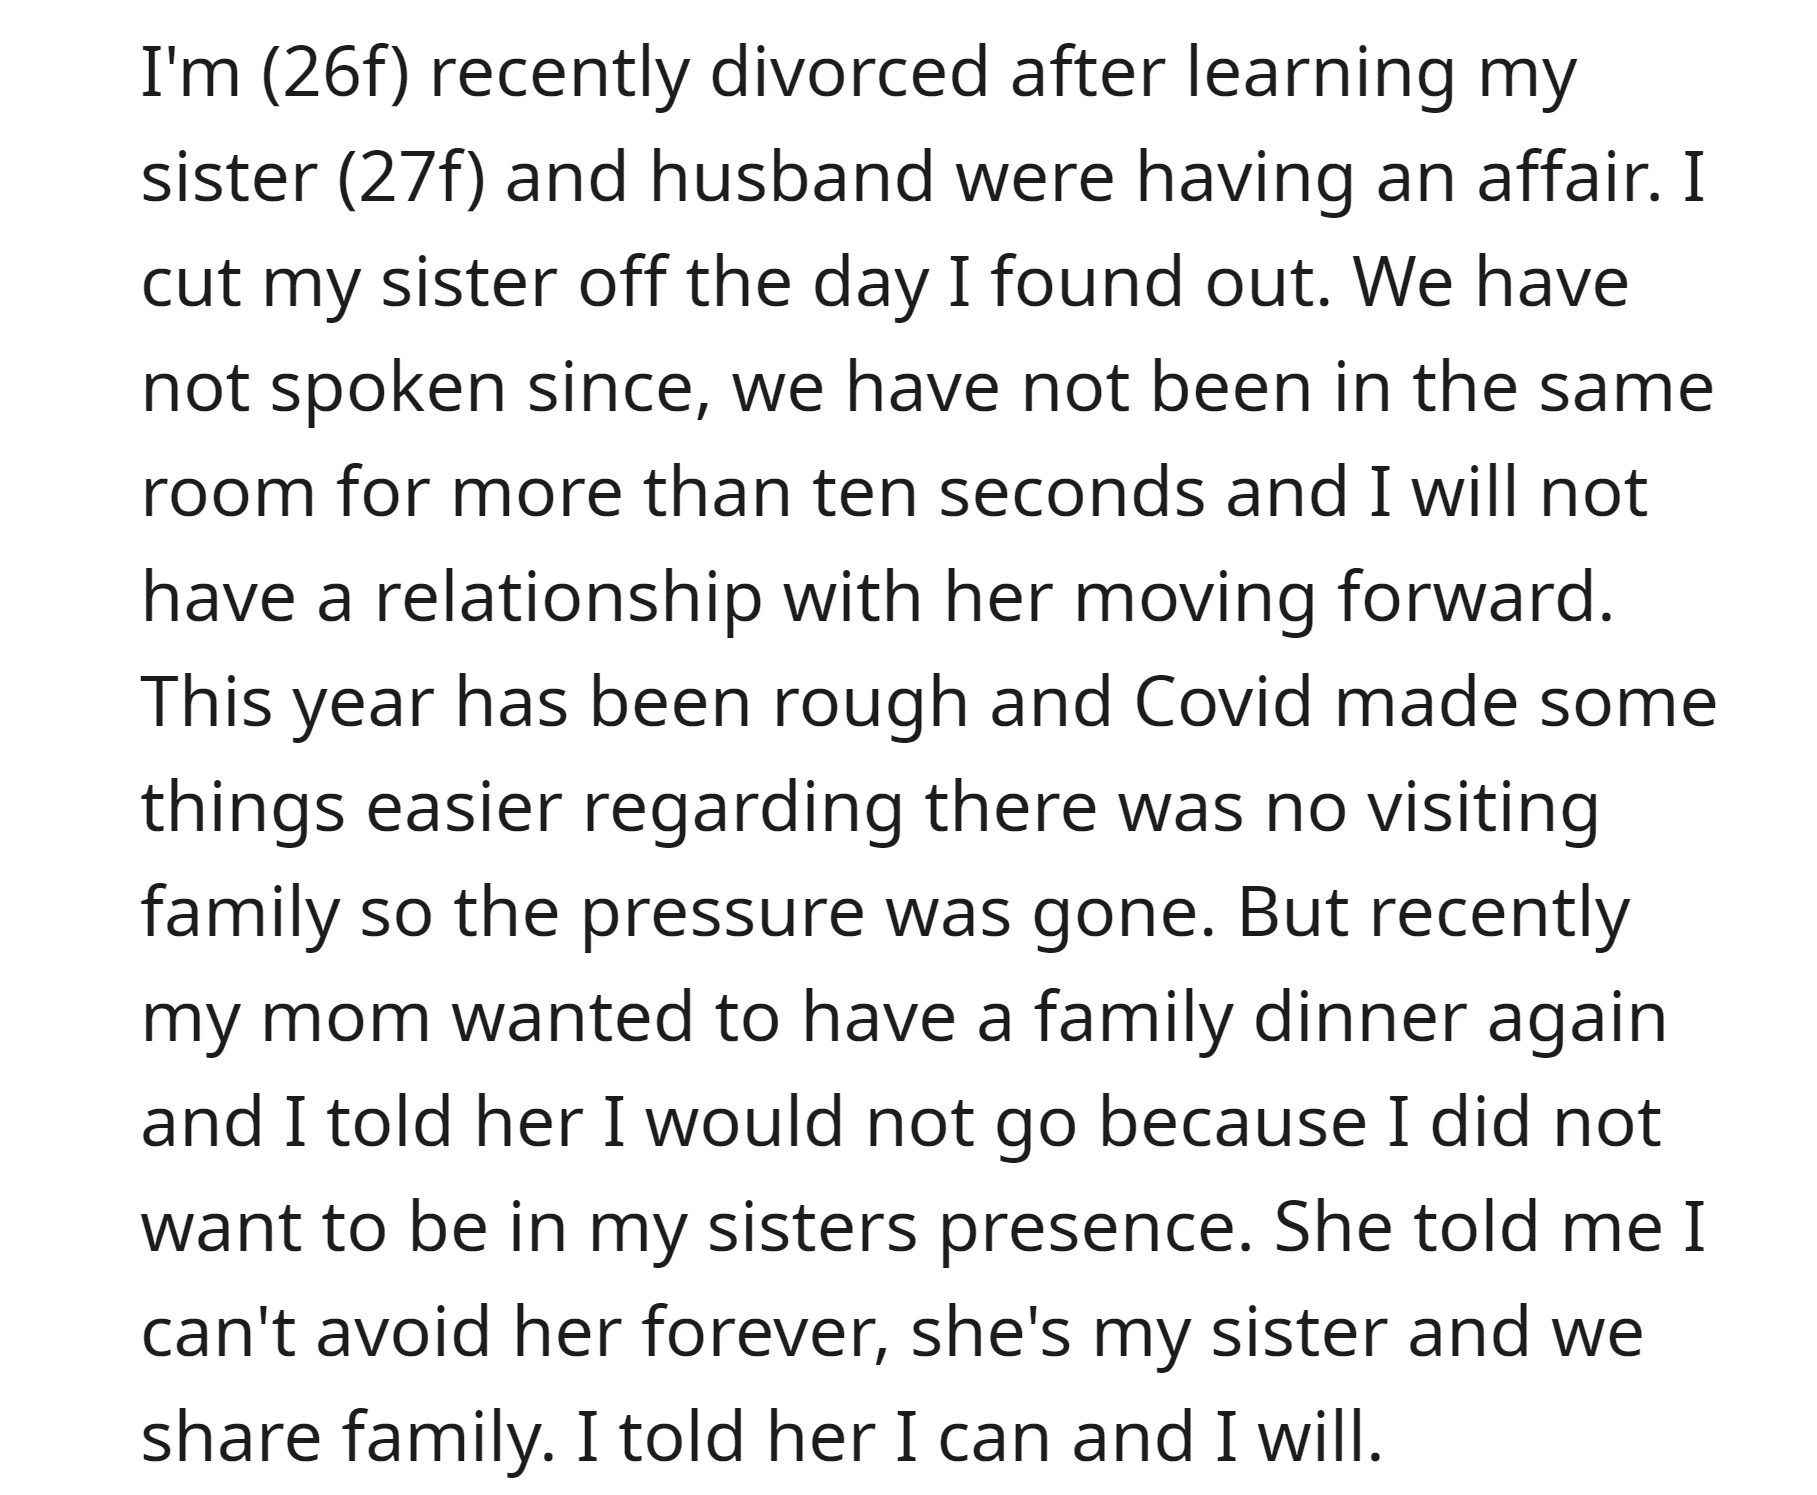 OP cut off her sister after discovering her affair with the OP's husband